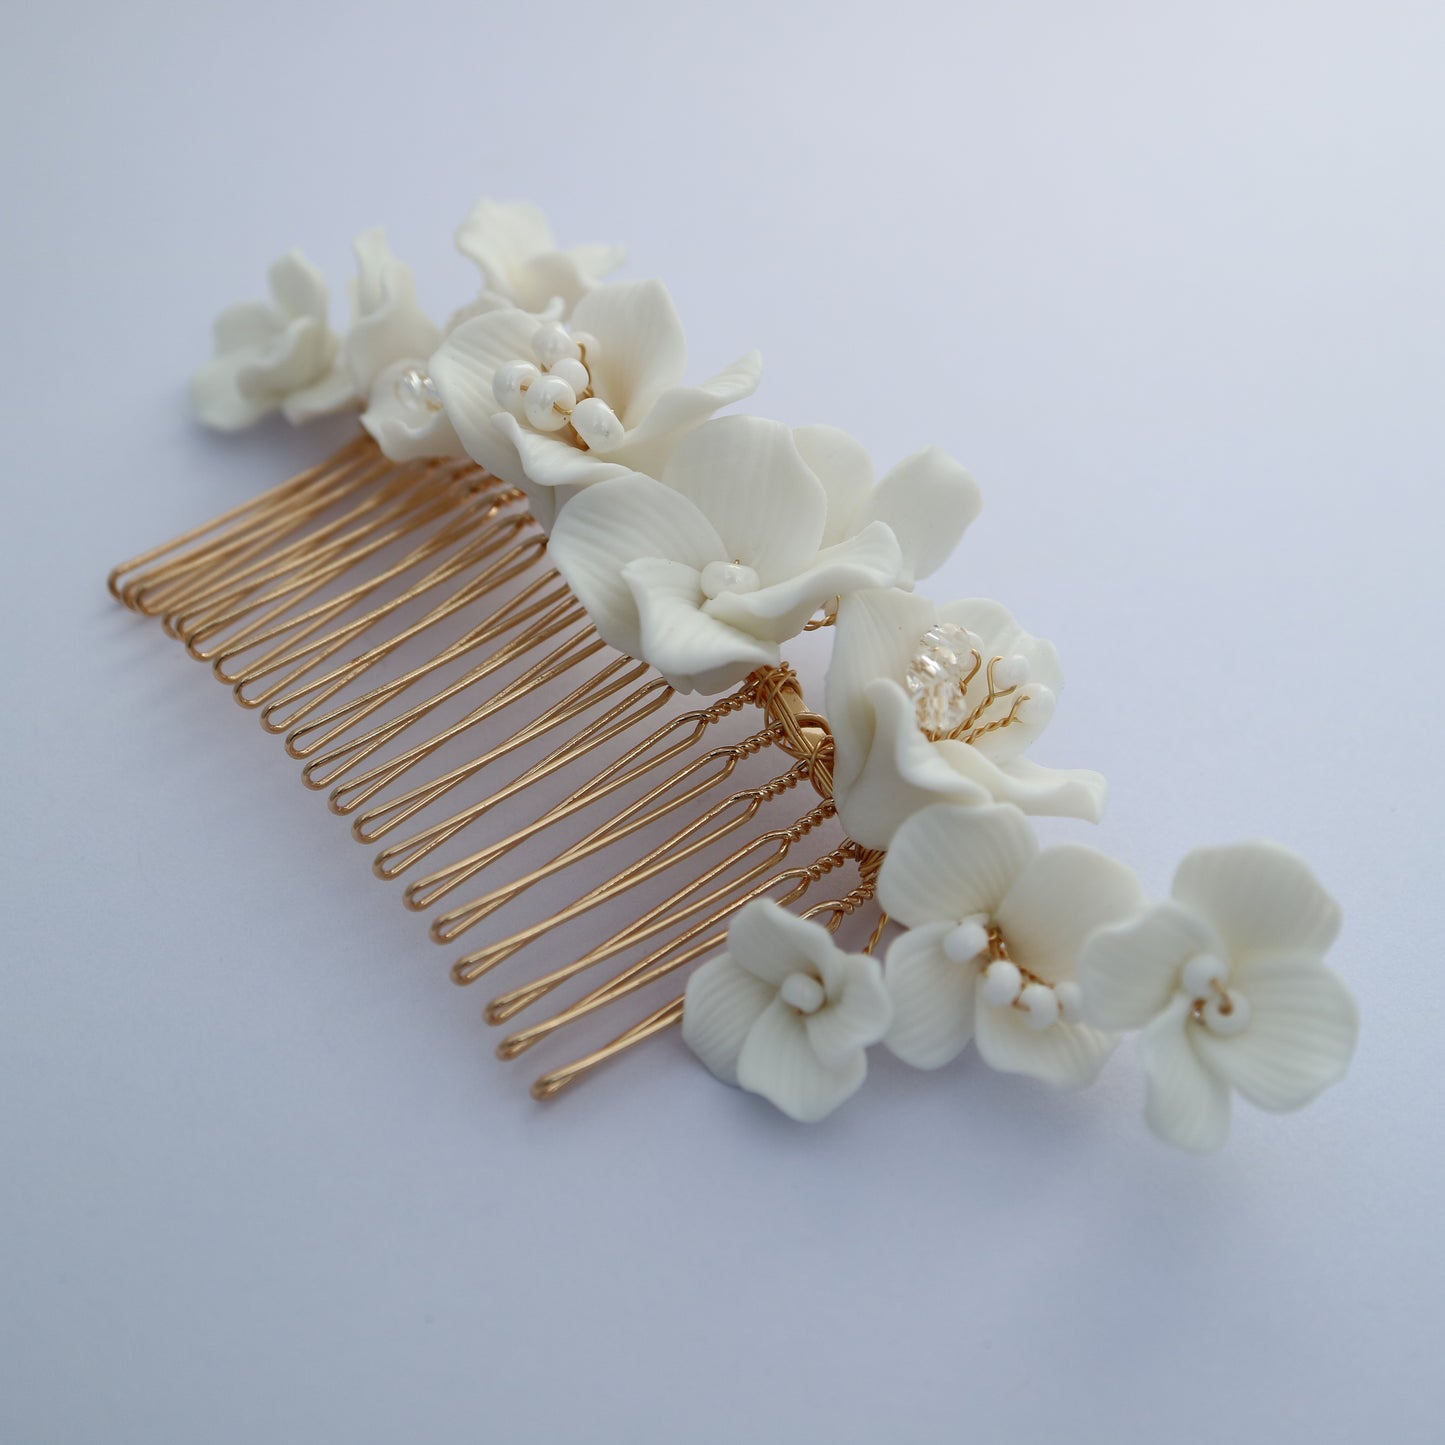 Spring Bloom bridal hair clip porcelain ceramic flowers and pearls